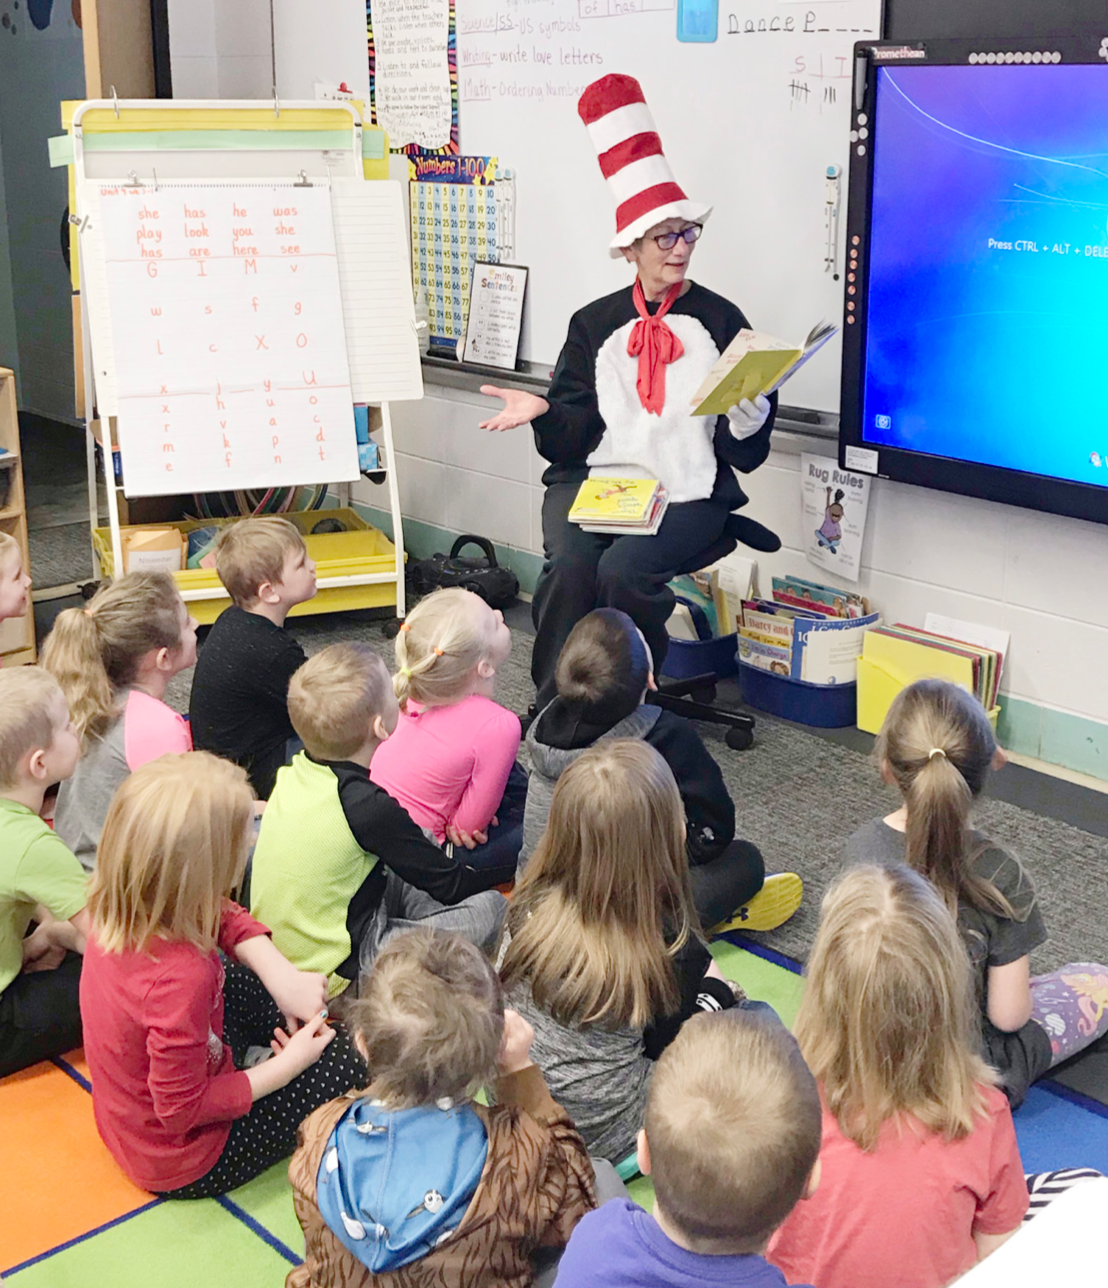 The Randolph Elementary School is celebrating Read Across America Week with Dr. Seuss.